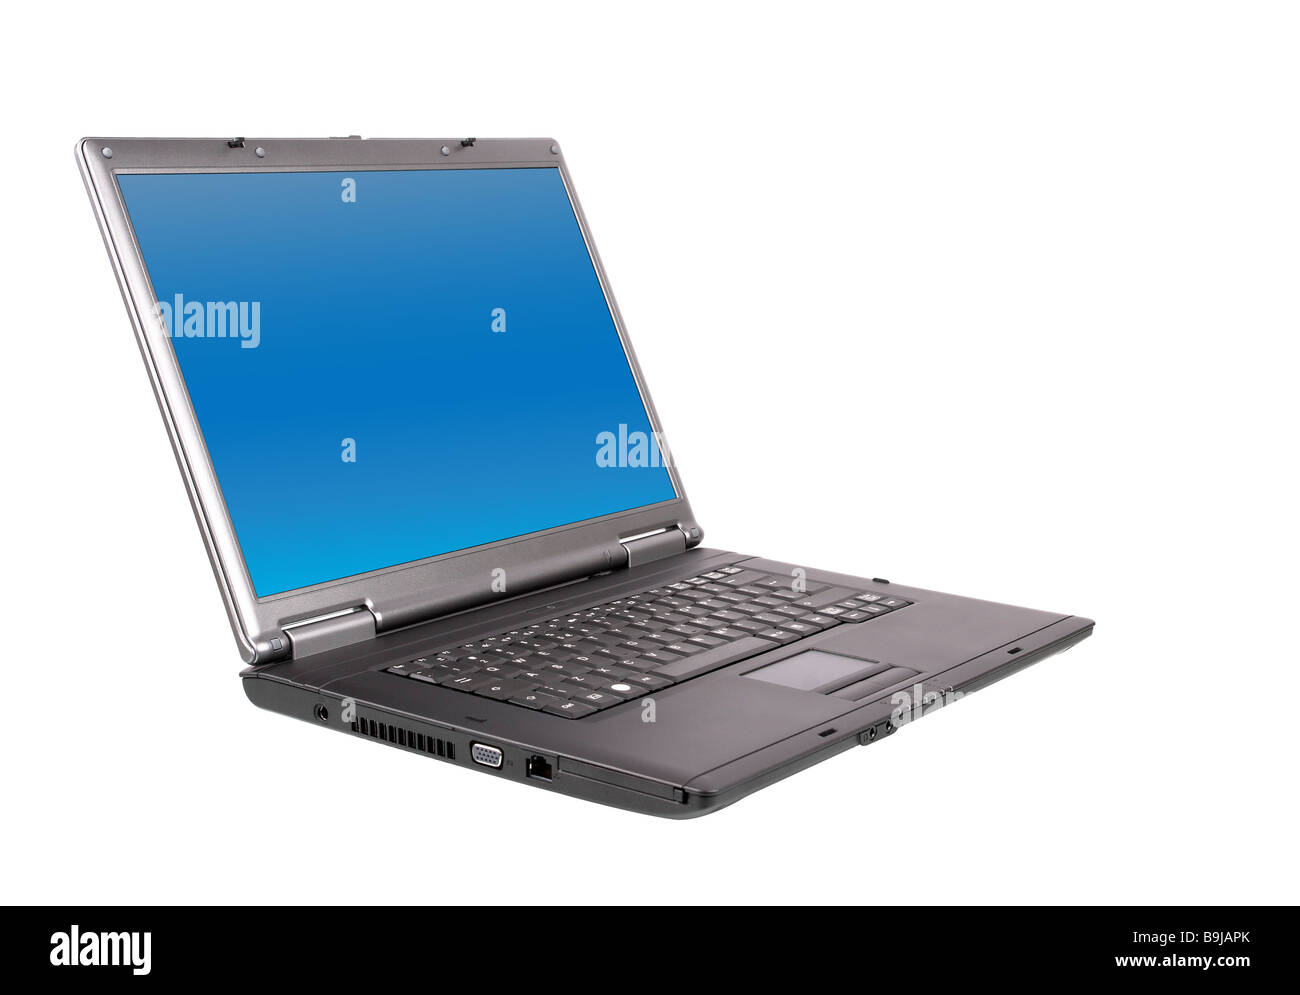 Laptop with blue screen Stock Photo